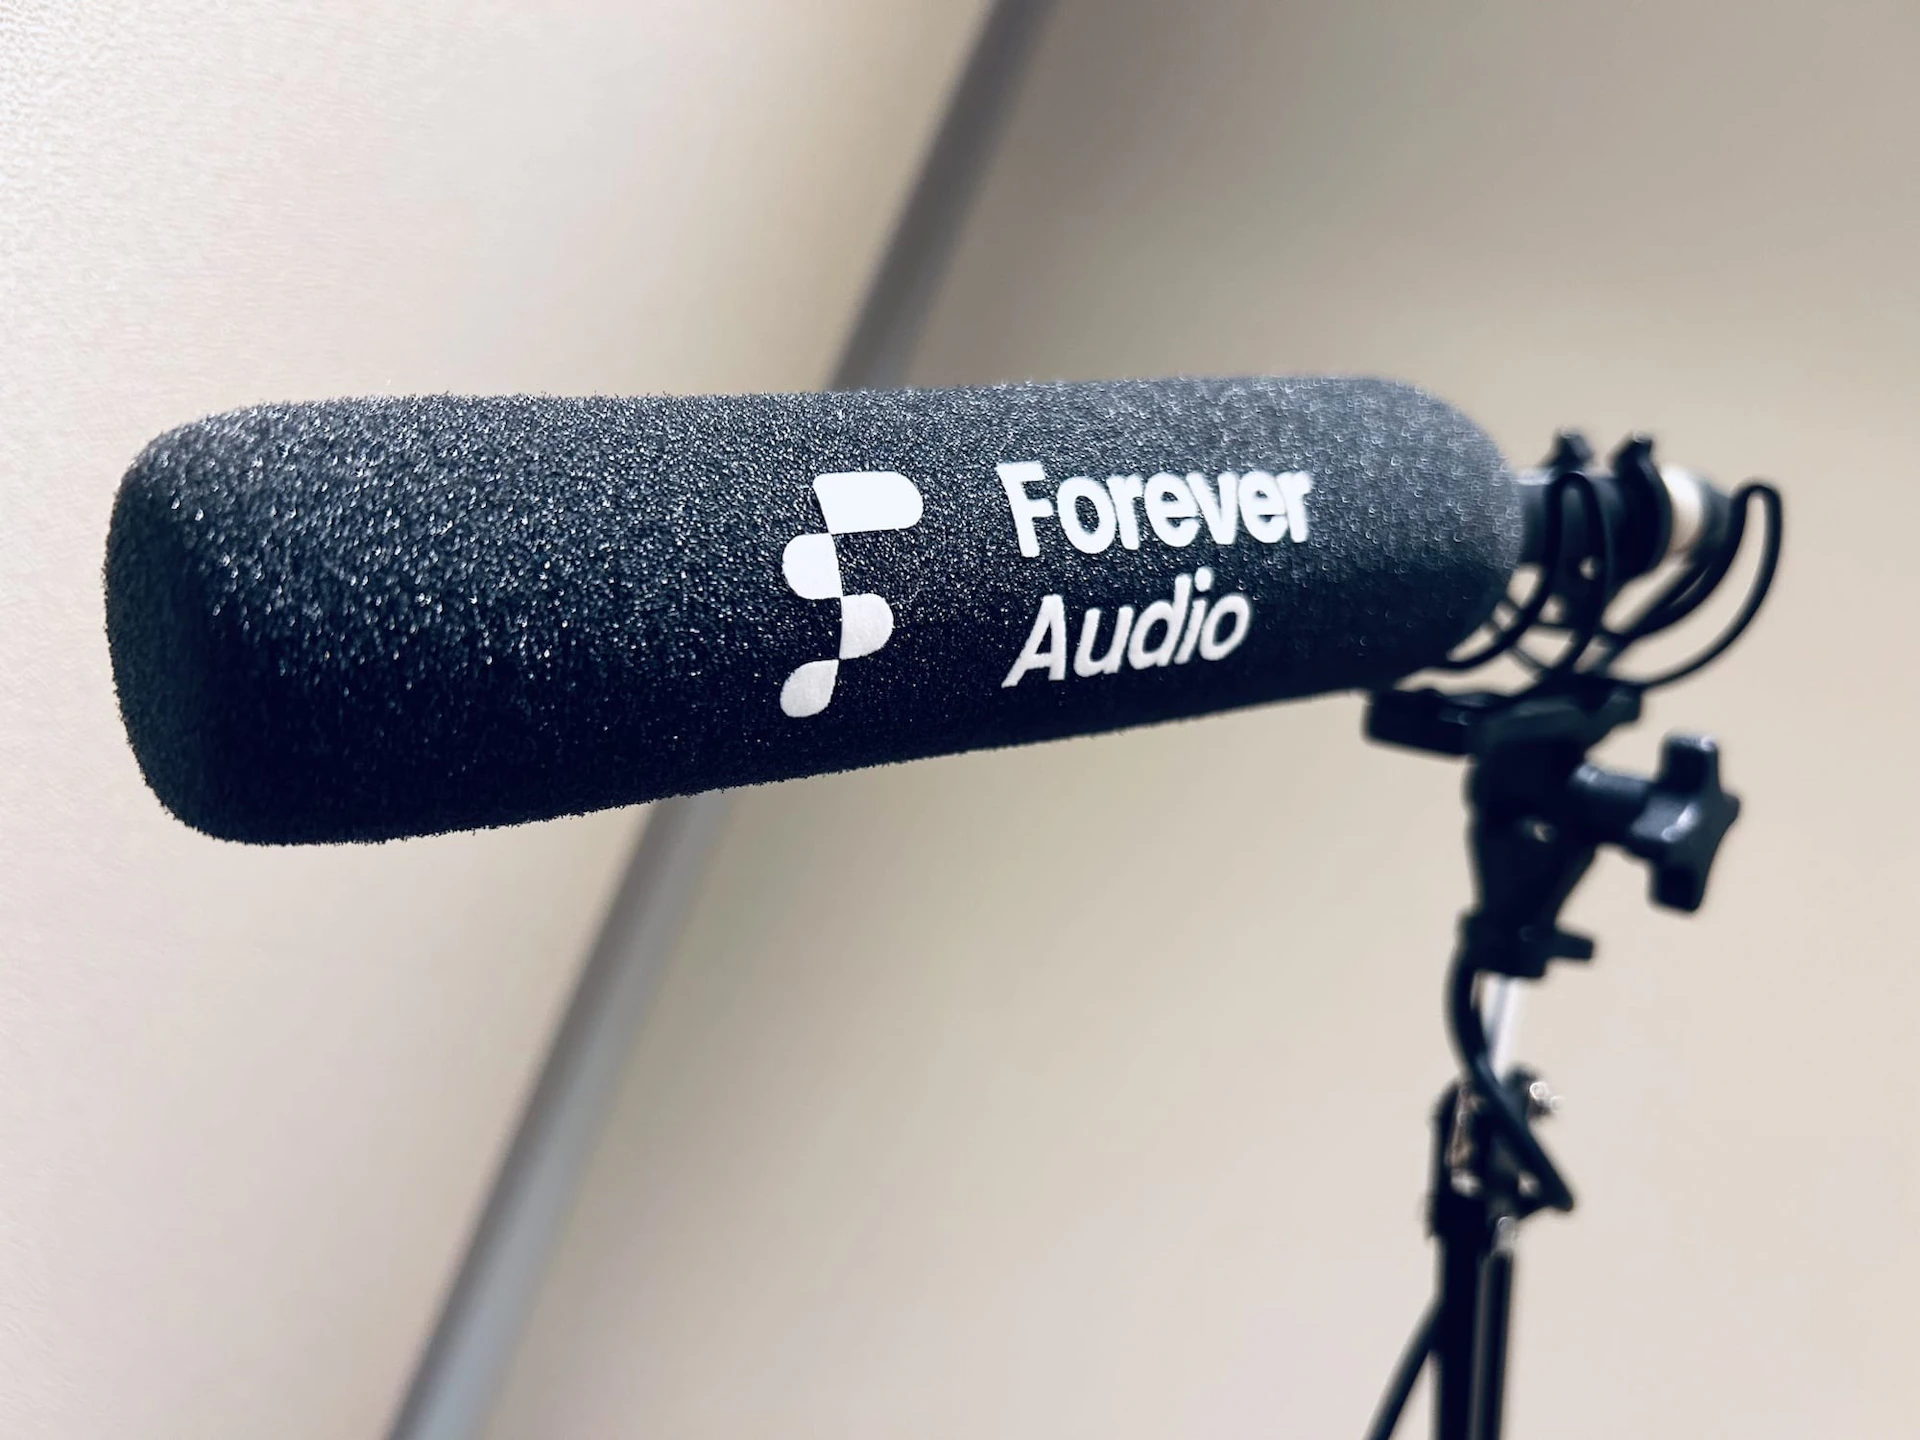 Voice recording microphone with Forever Audio logo